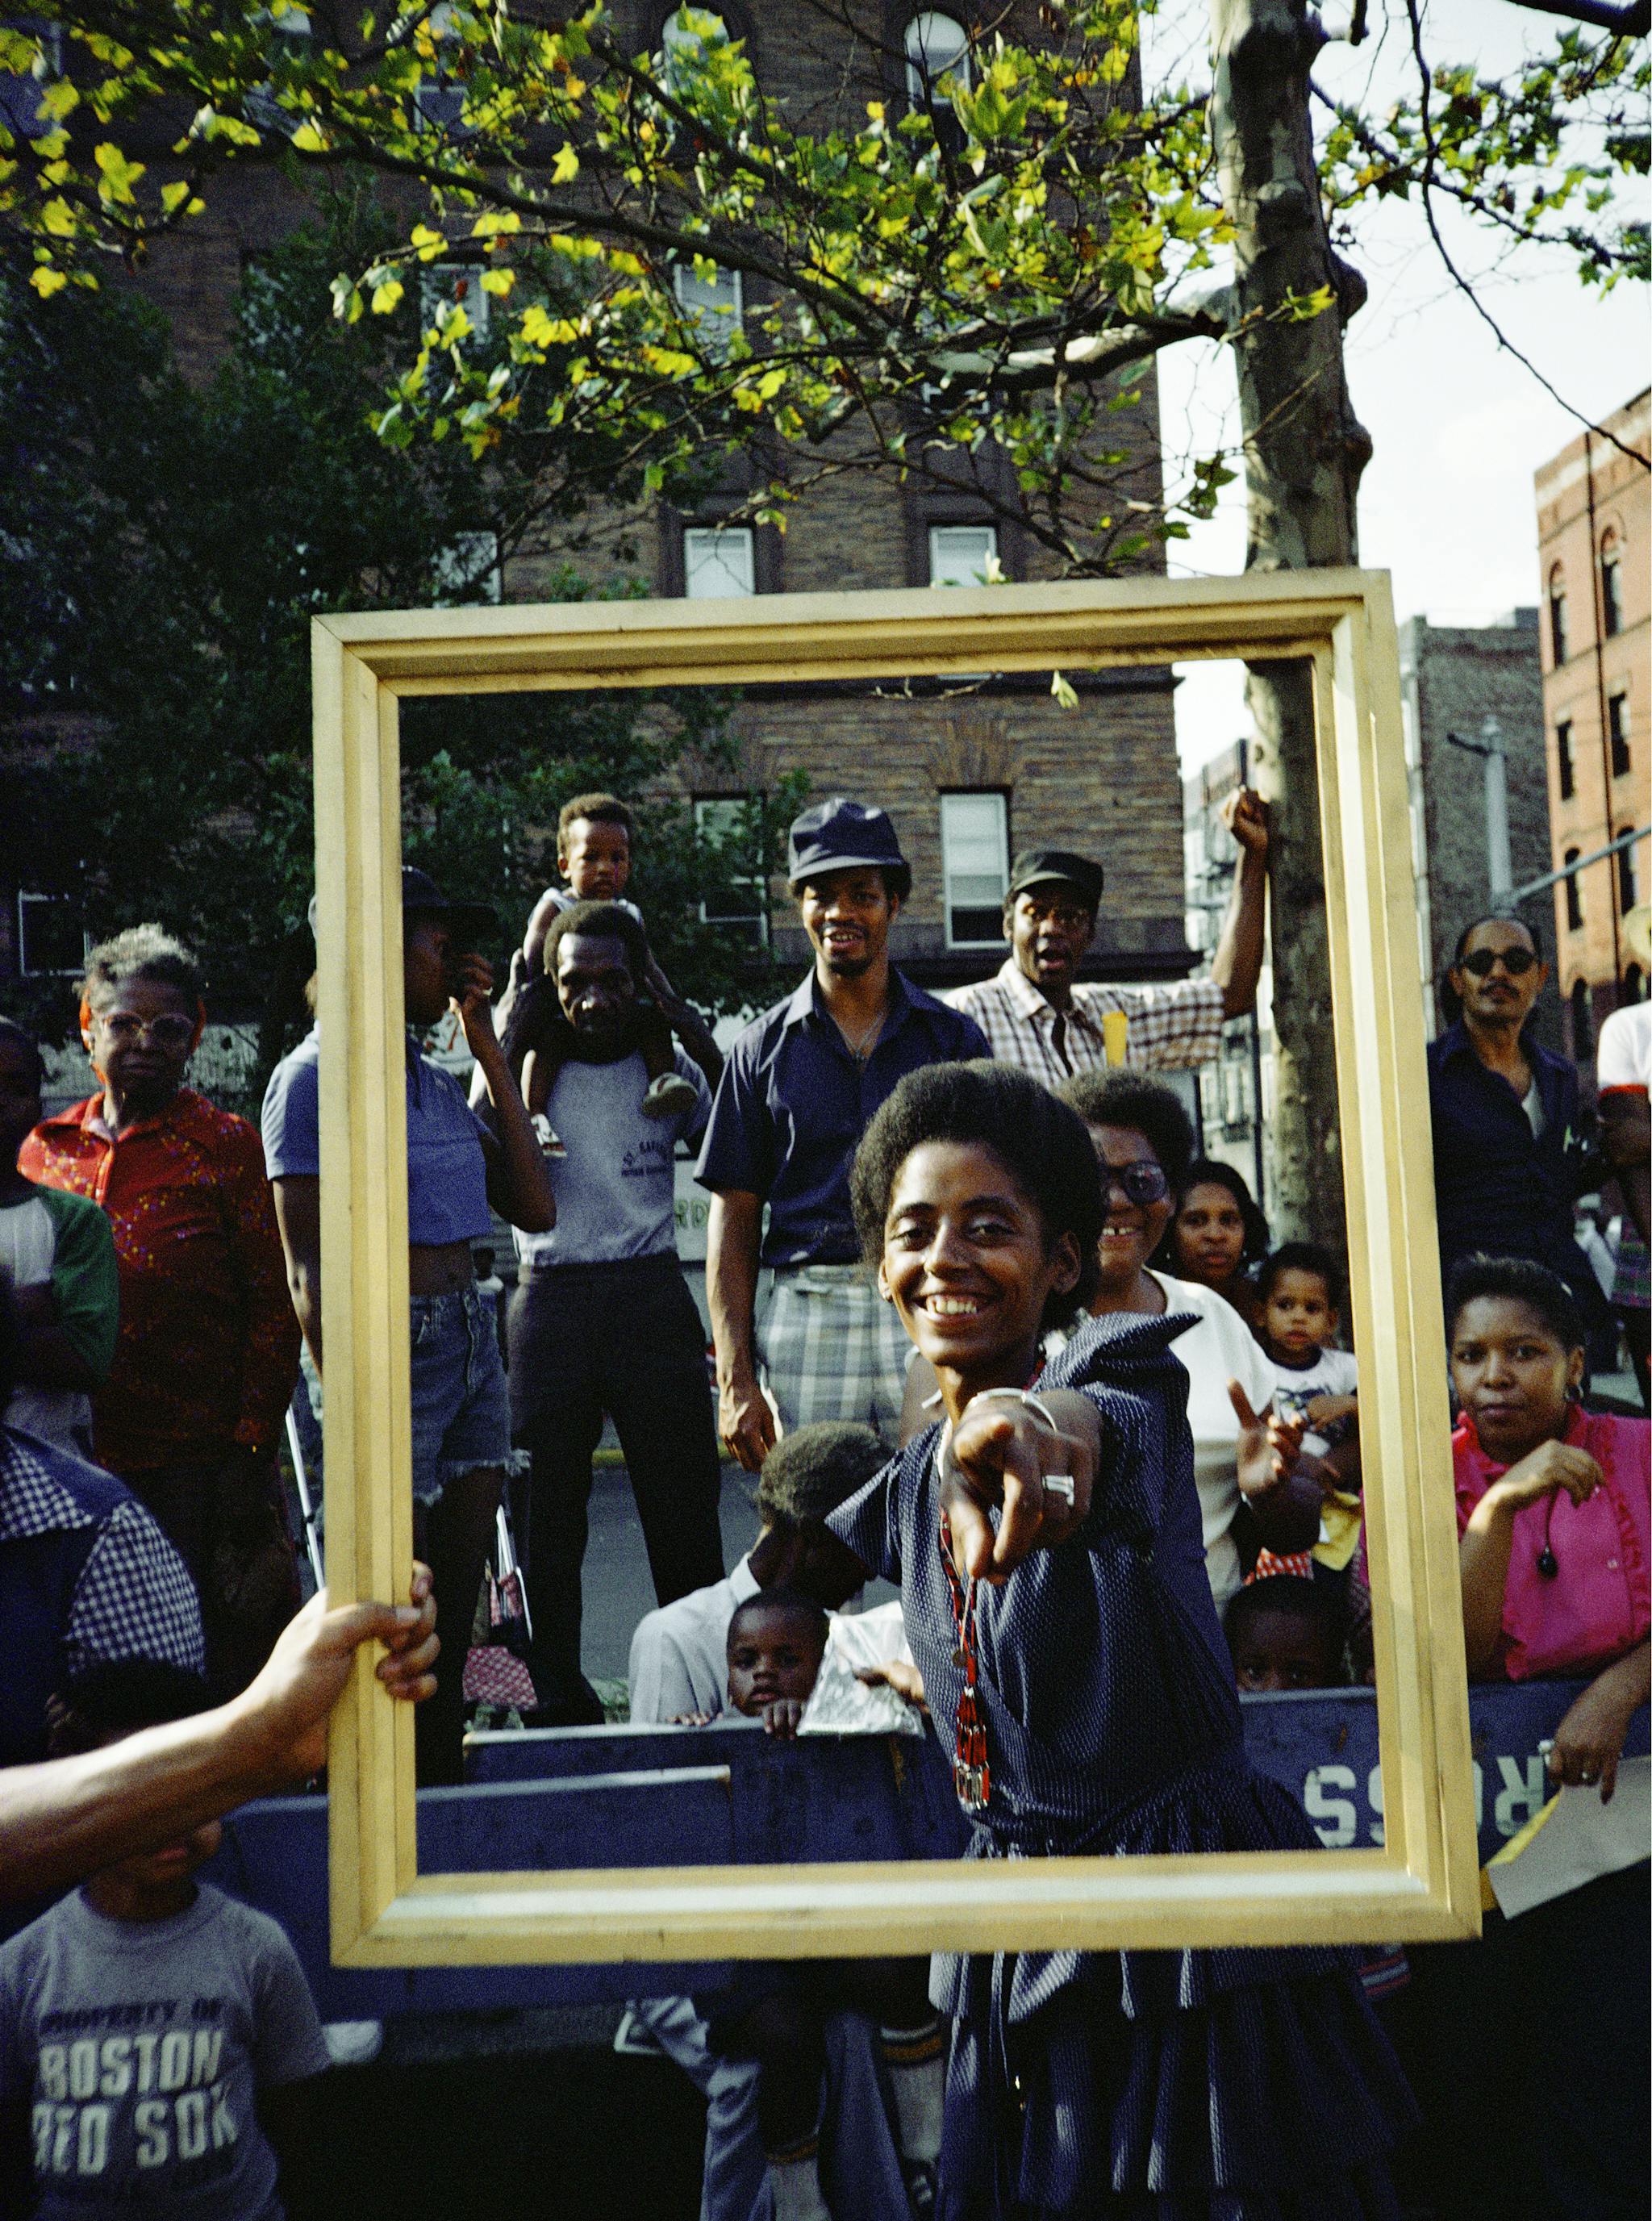 A group of figures appear within a wooden picture frame, while a young person points directly at the camera, smiling.